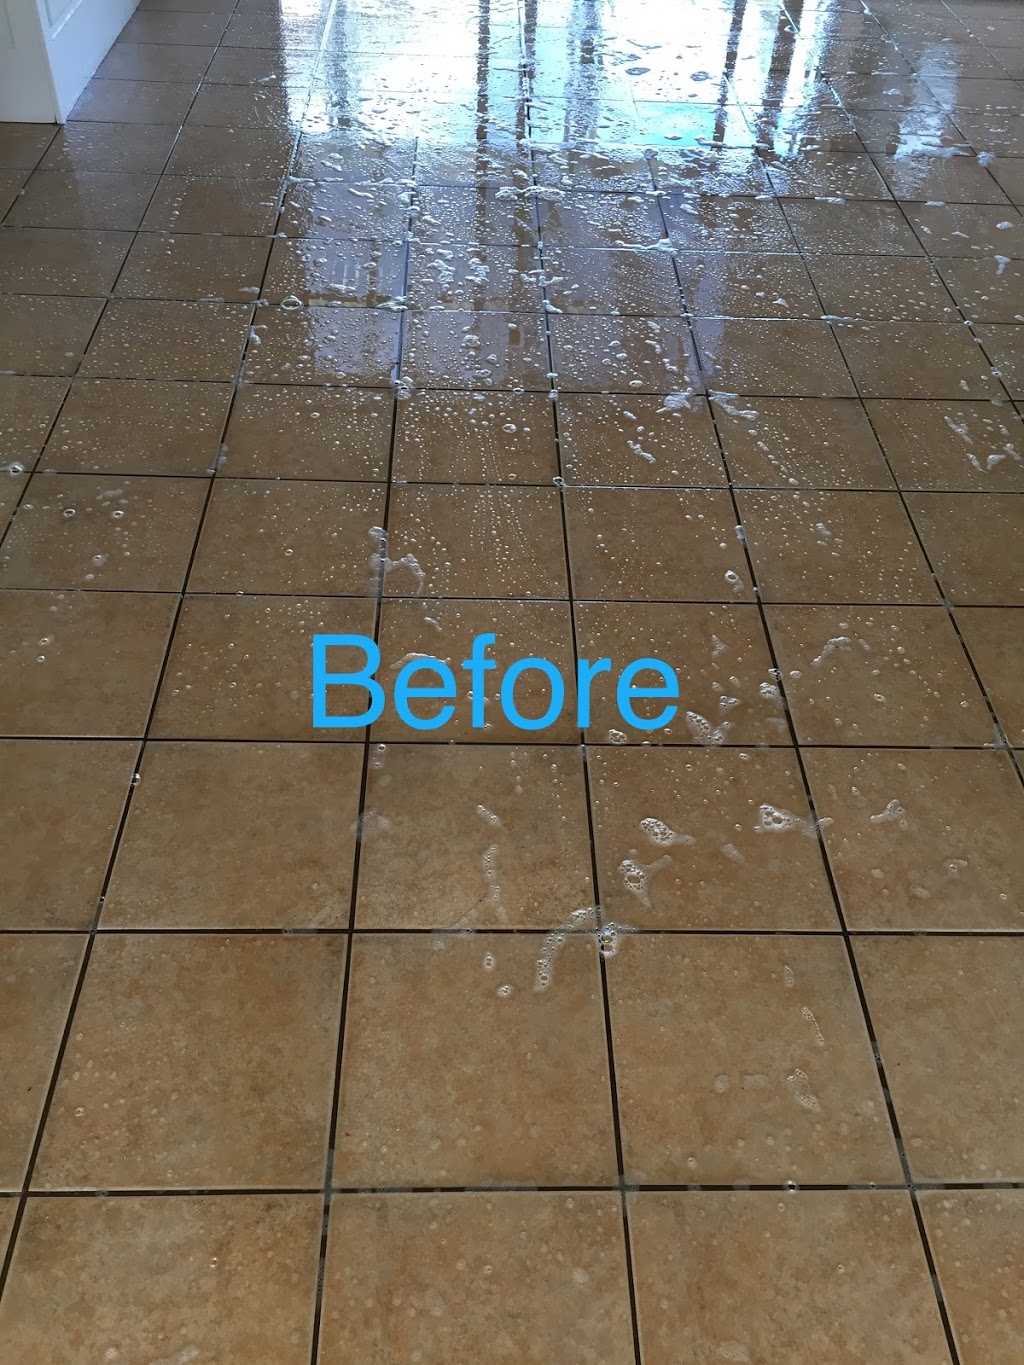 Ecodry Carpet and Tile cleaning | laundry | Wyatt St, Mount Gambier SA 5290, Australia | 0466413435 OR +61 466 413 435